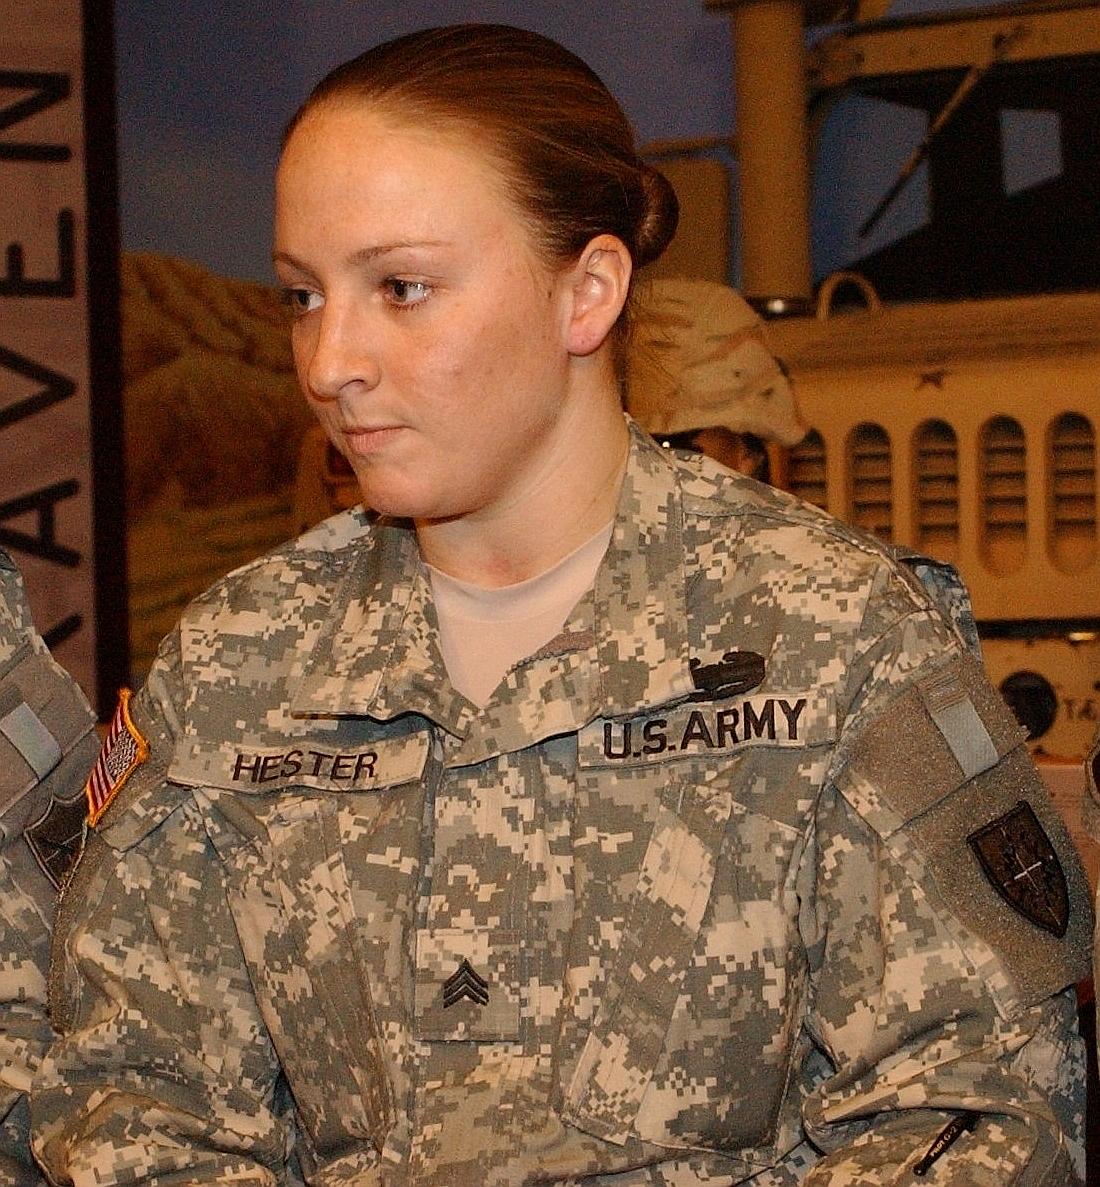 (<a href="https://en.wikipedia.org/wiki/File:Leigh_Ann_Hester_on_February_3,_2007_(cropped).jpg">Sergeant Gina Vaile, United States Army</a>/Wikipedia)